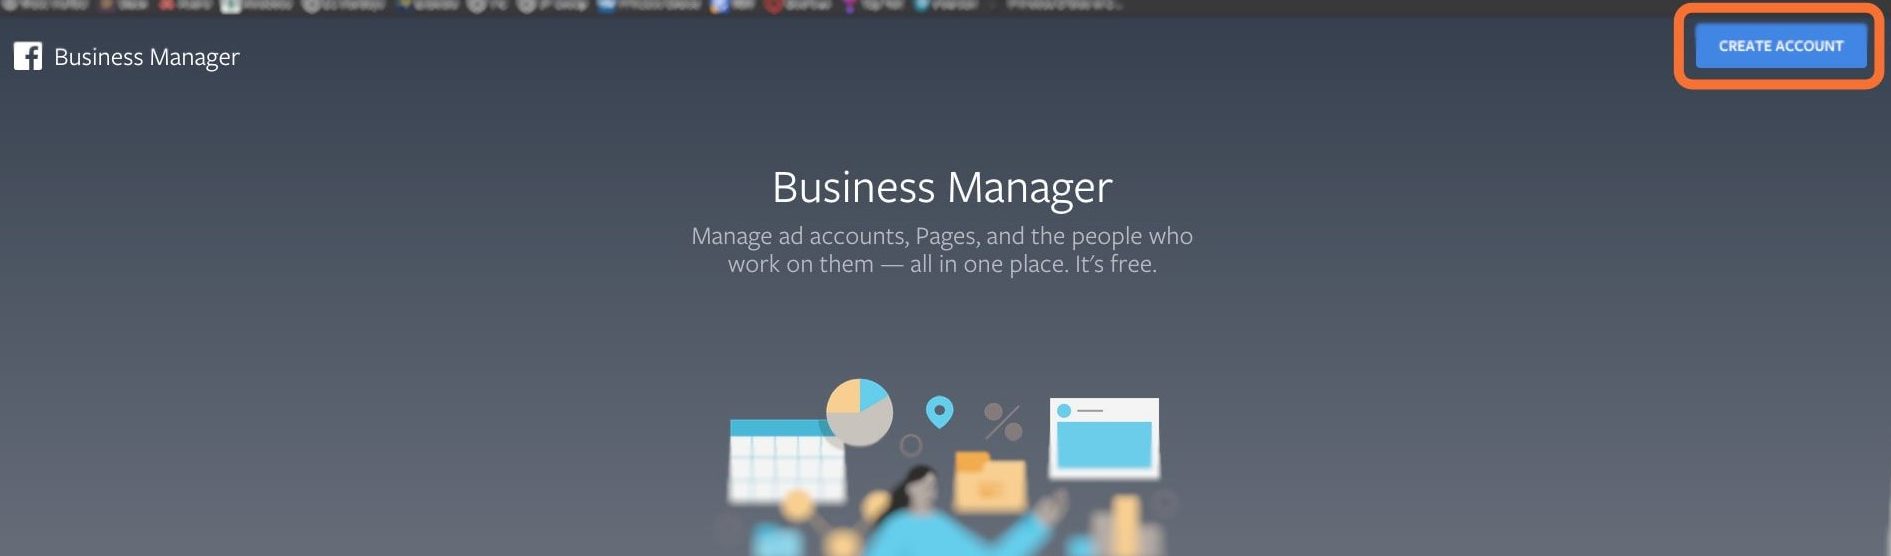 upgrade-to-business-manager